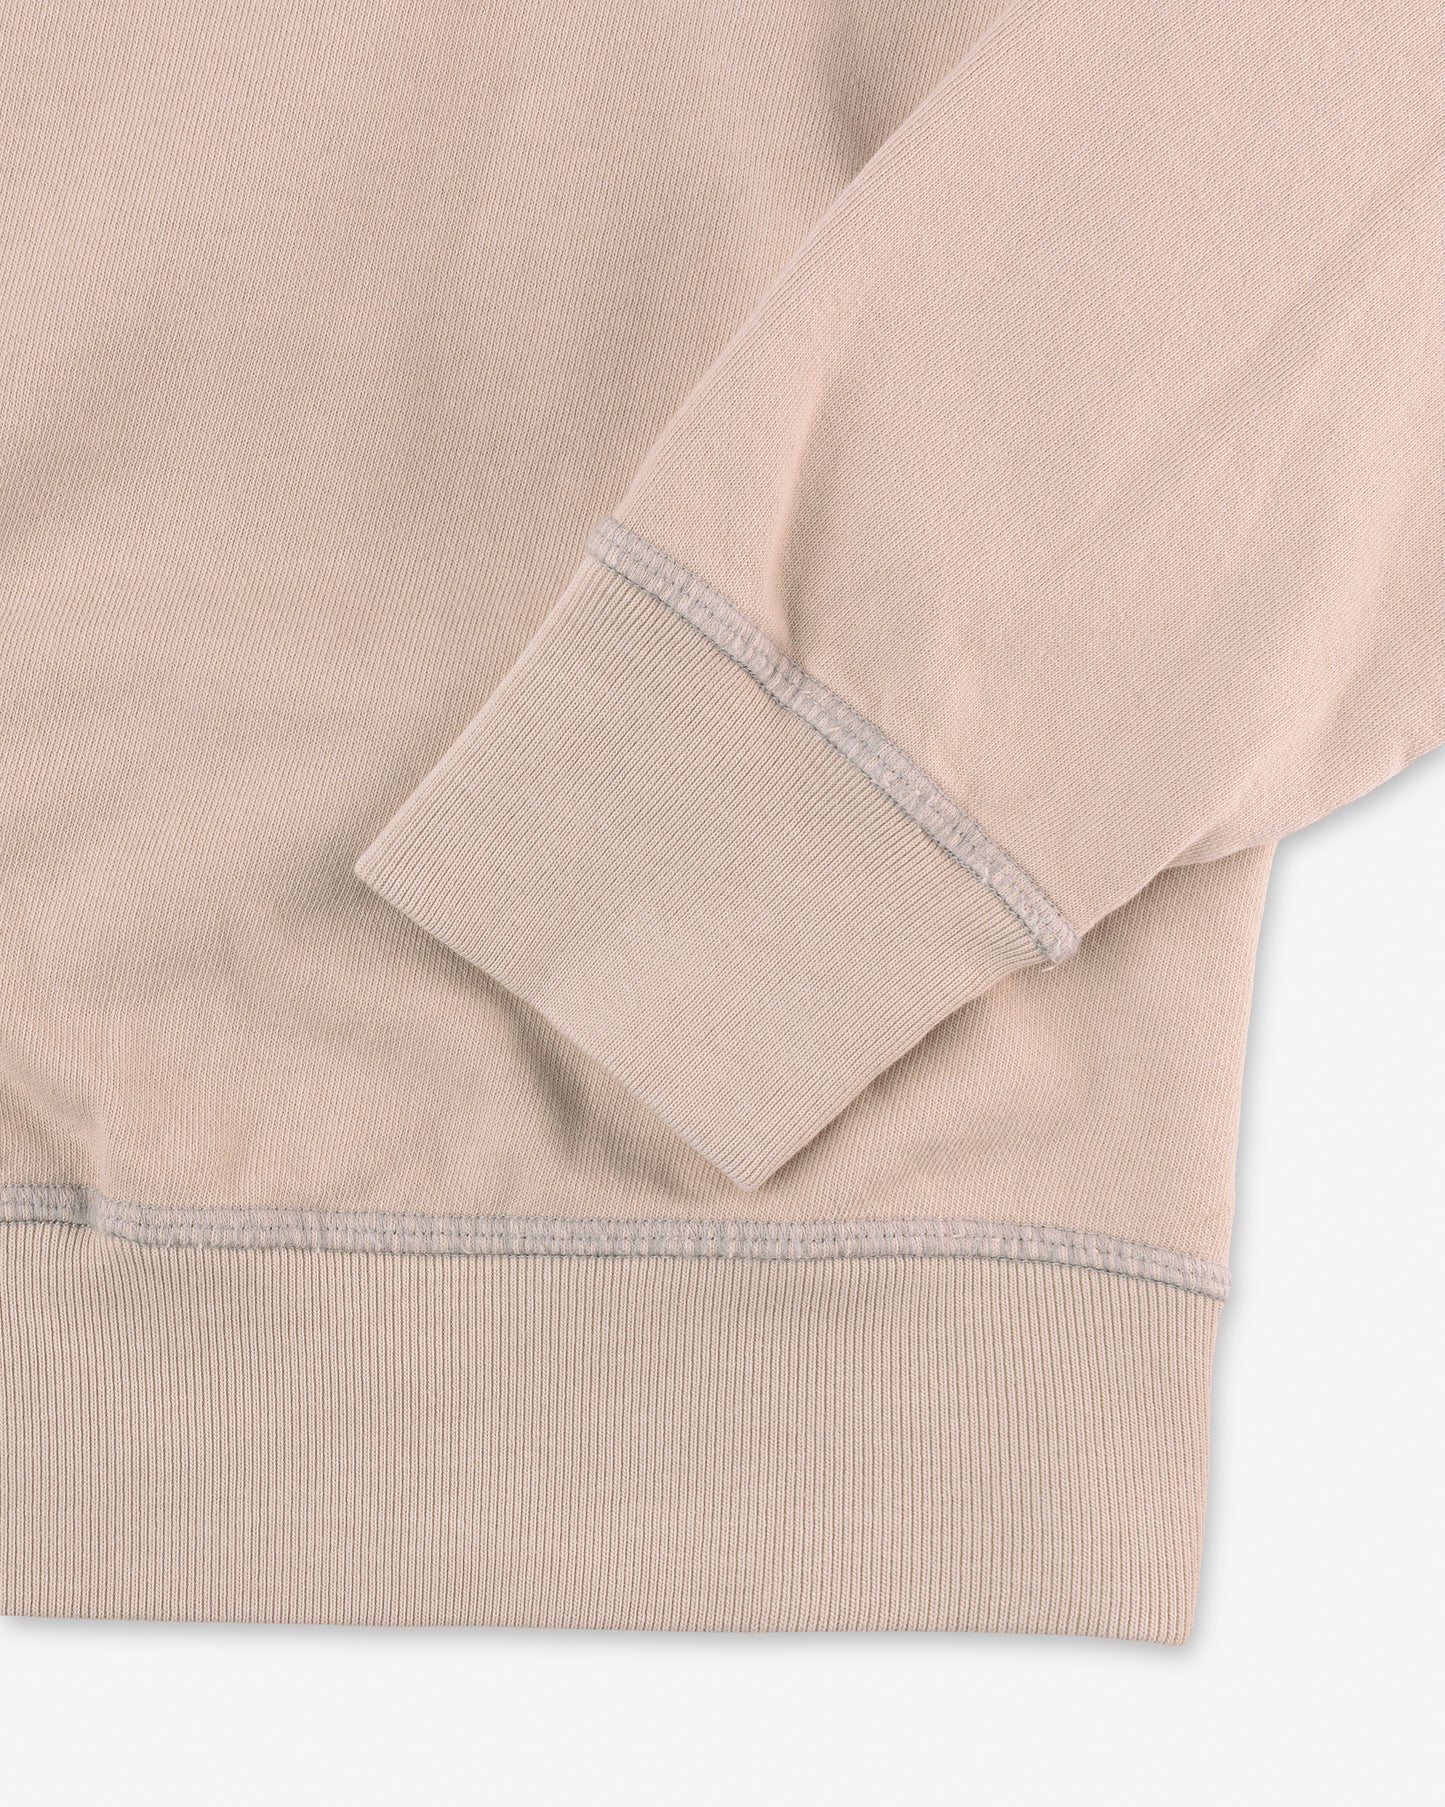 close up of hem and collar on front of men's light beige khaki long sleeve sweatshirt made with organic cotton